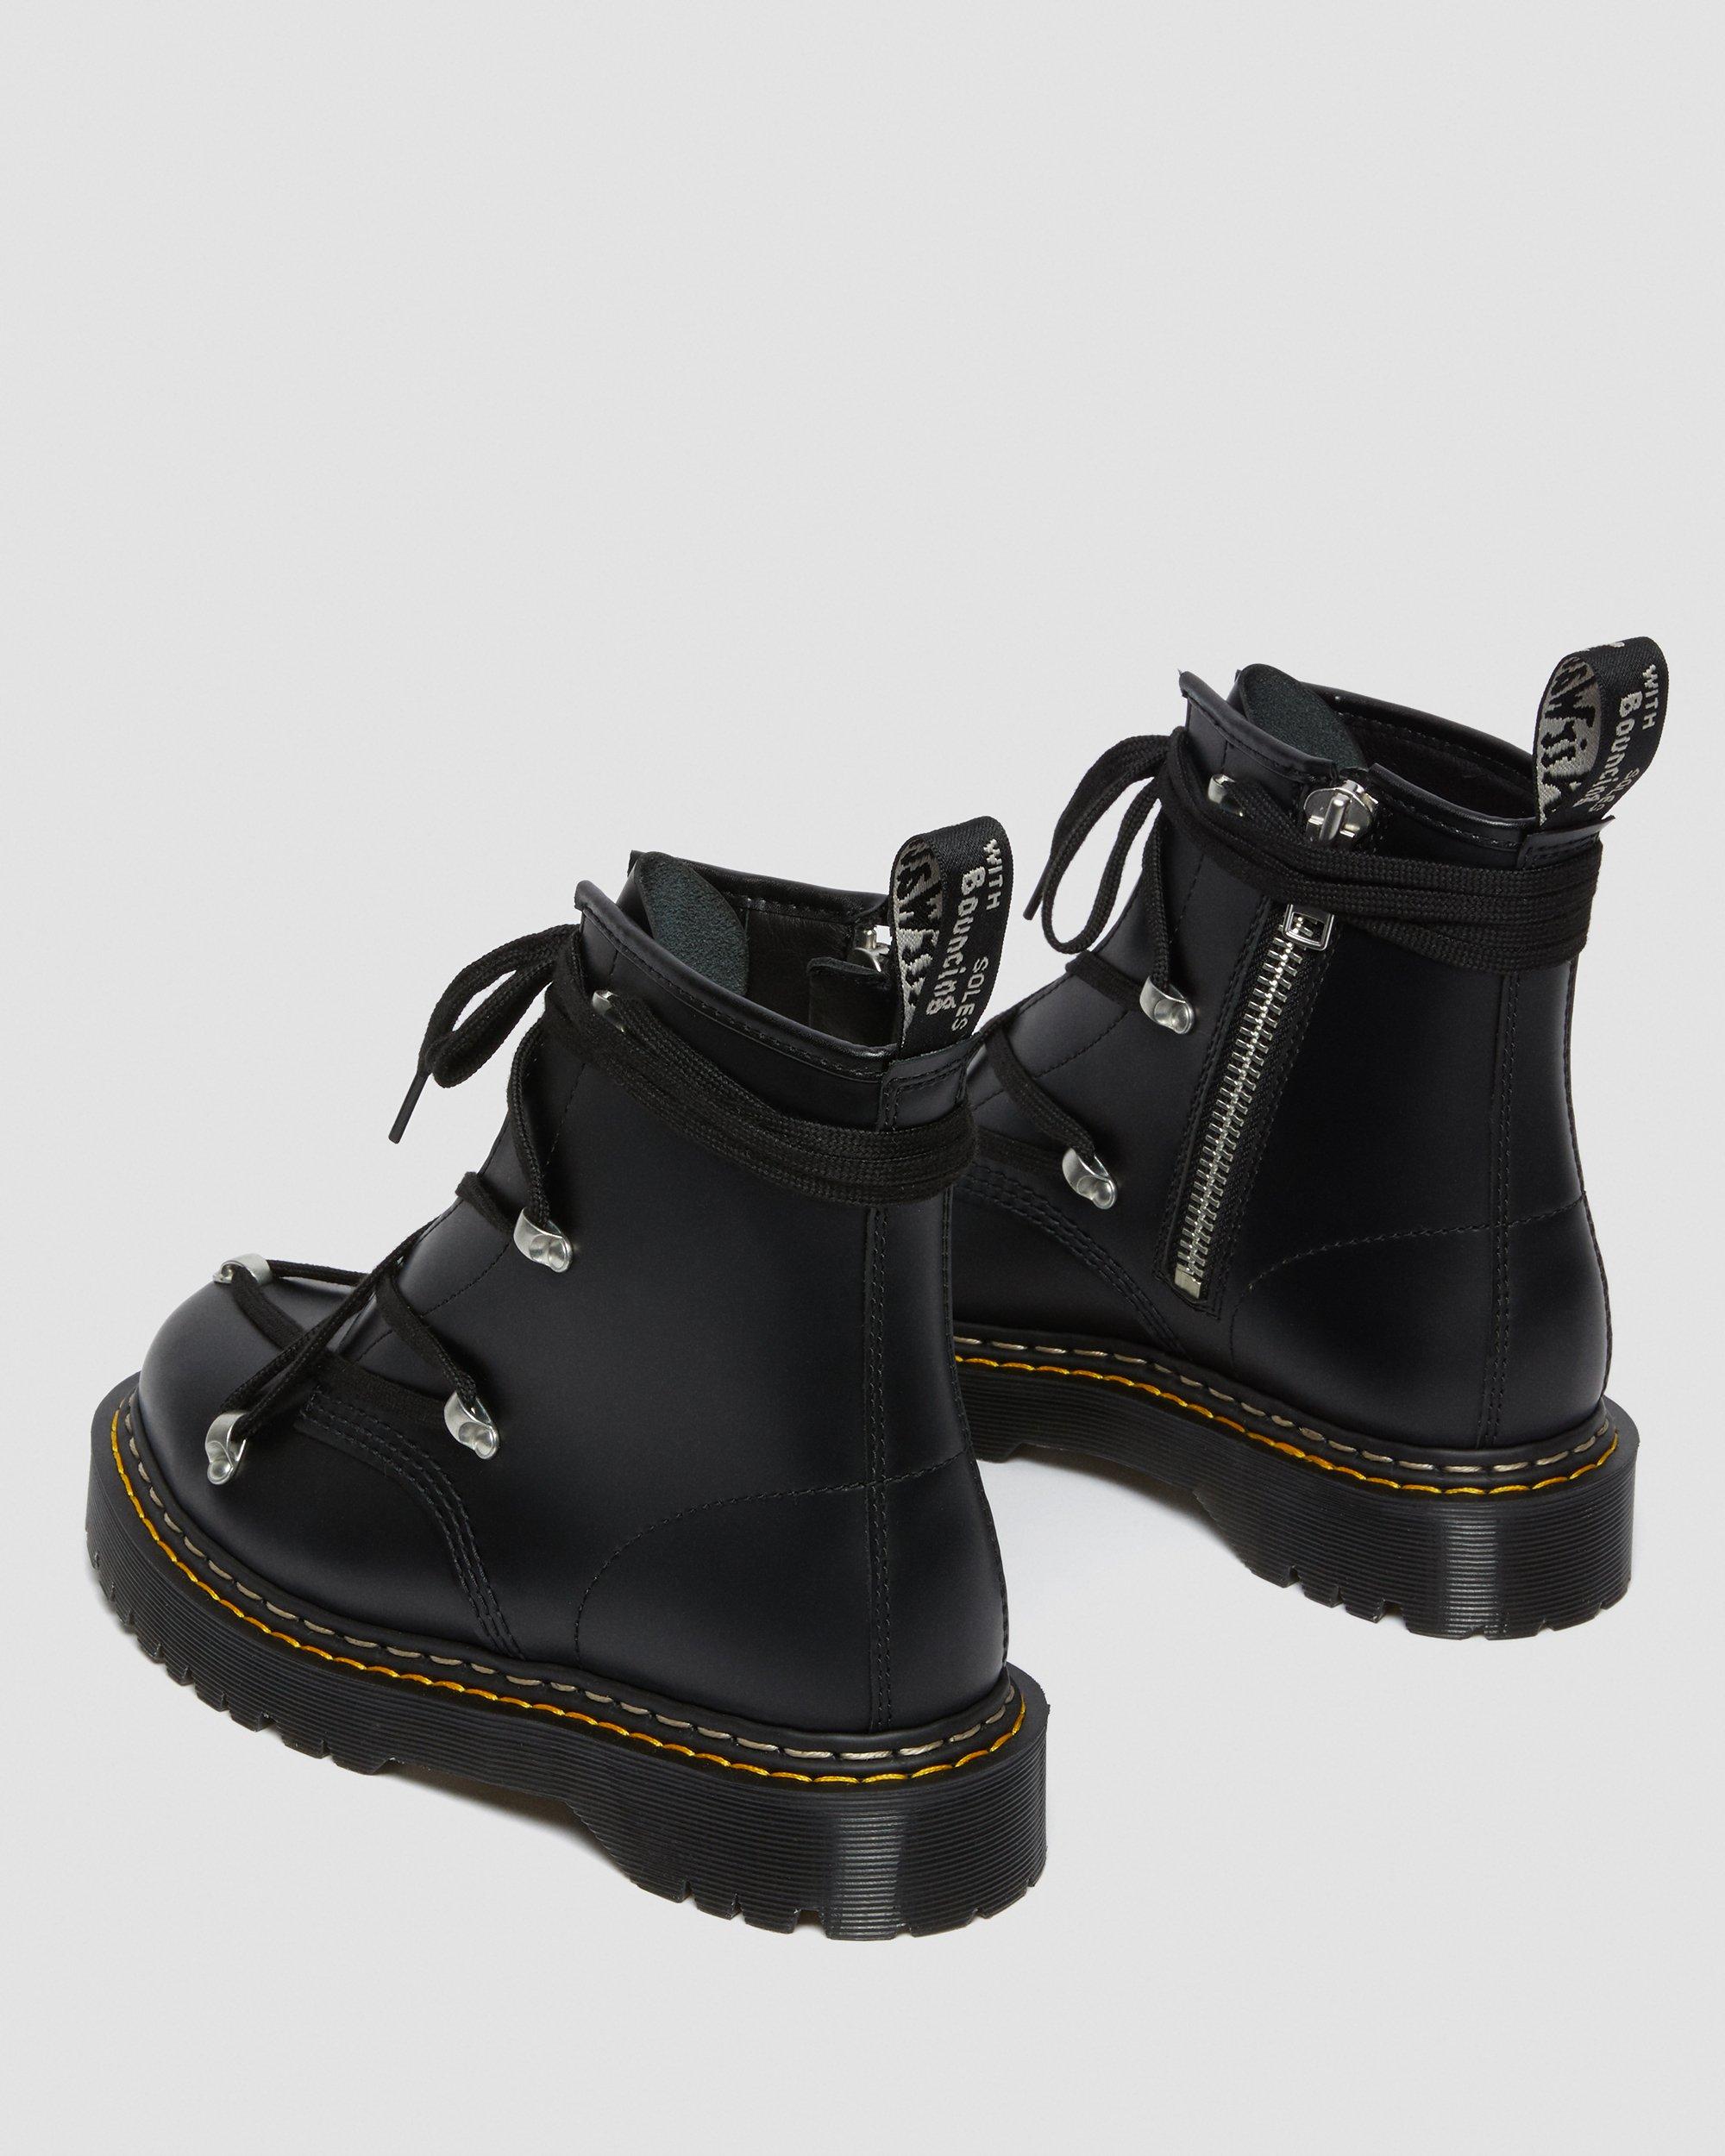 DR MARTENS Rick Owens 1460 Bex Leather Lace Up Boots